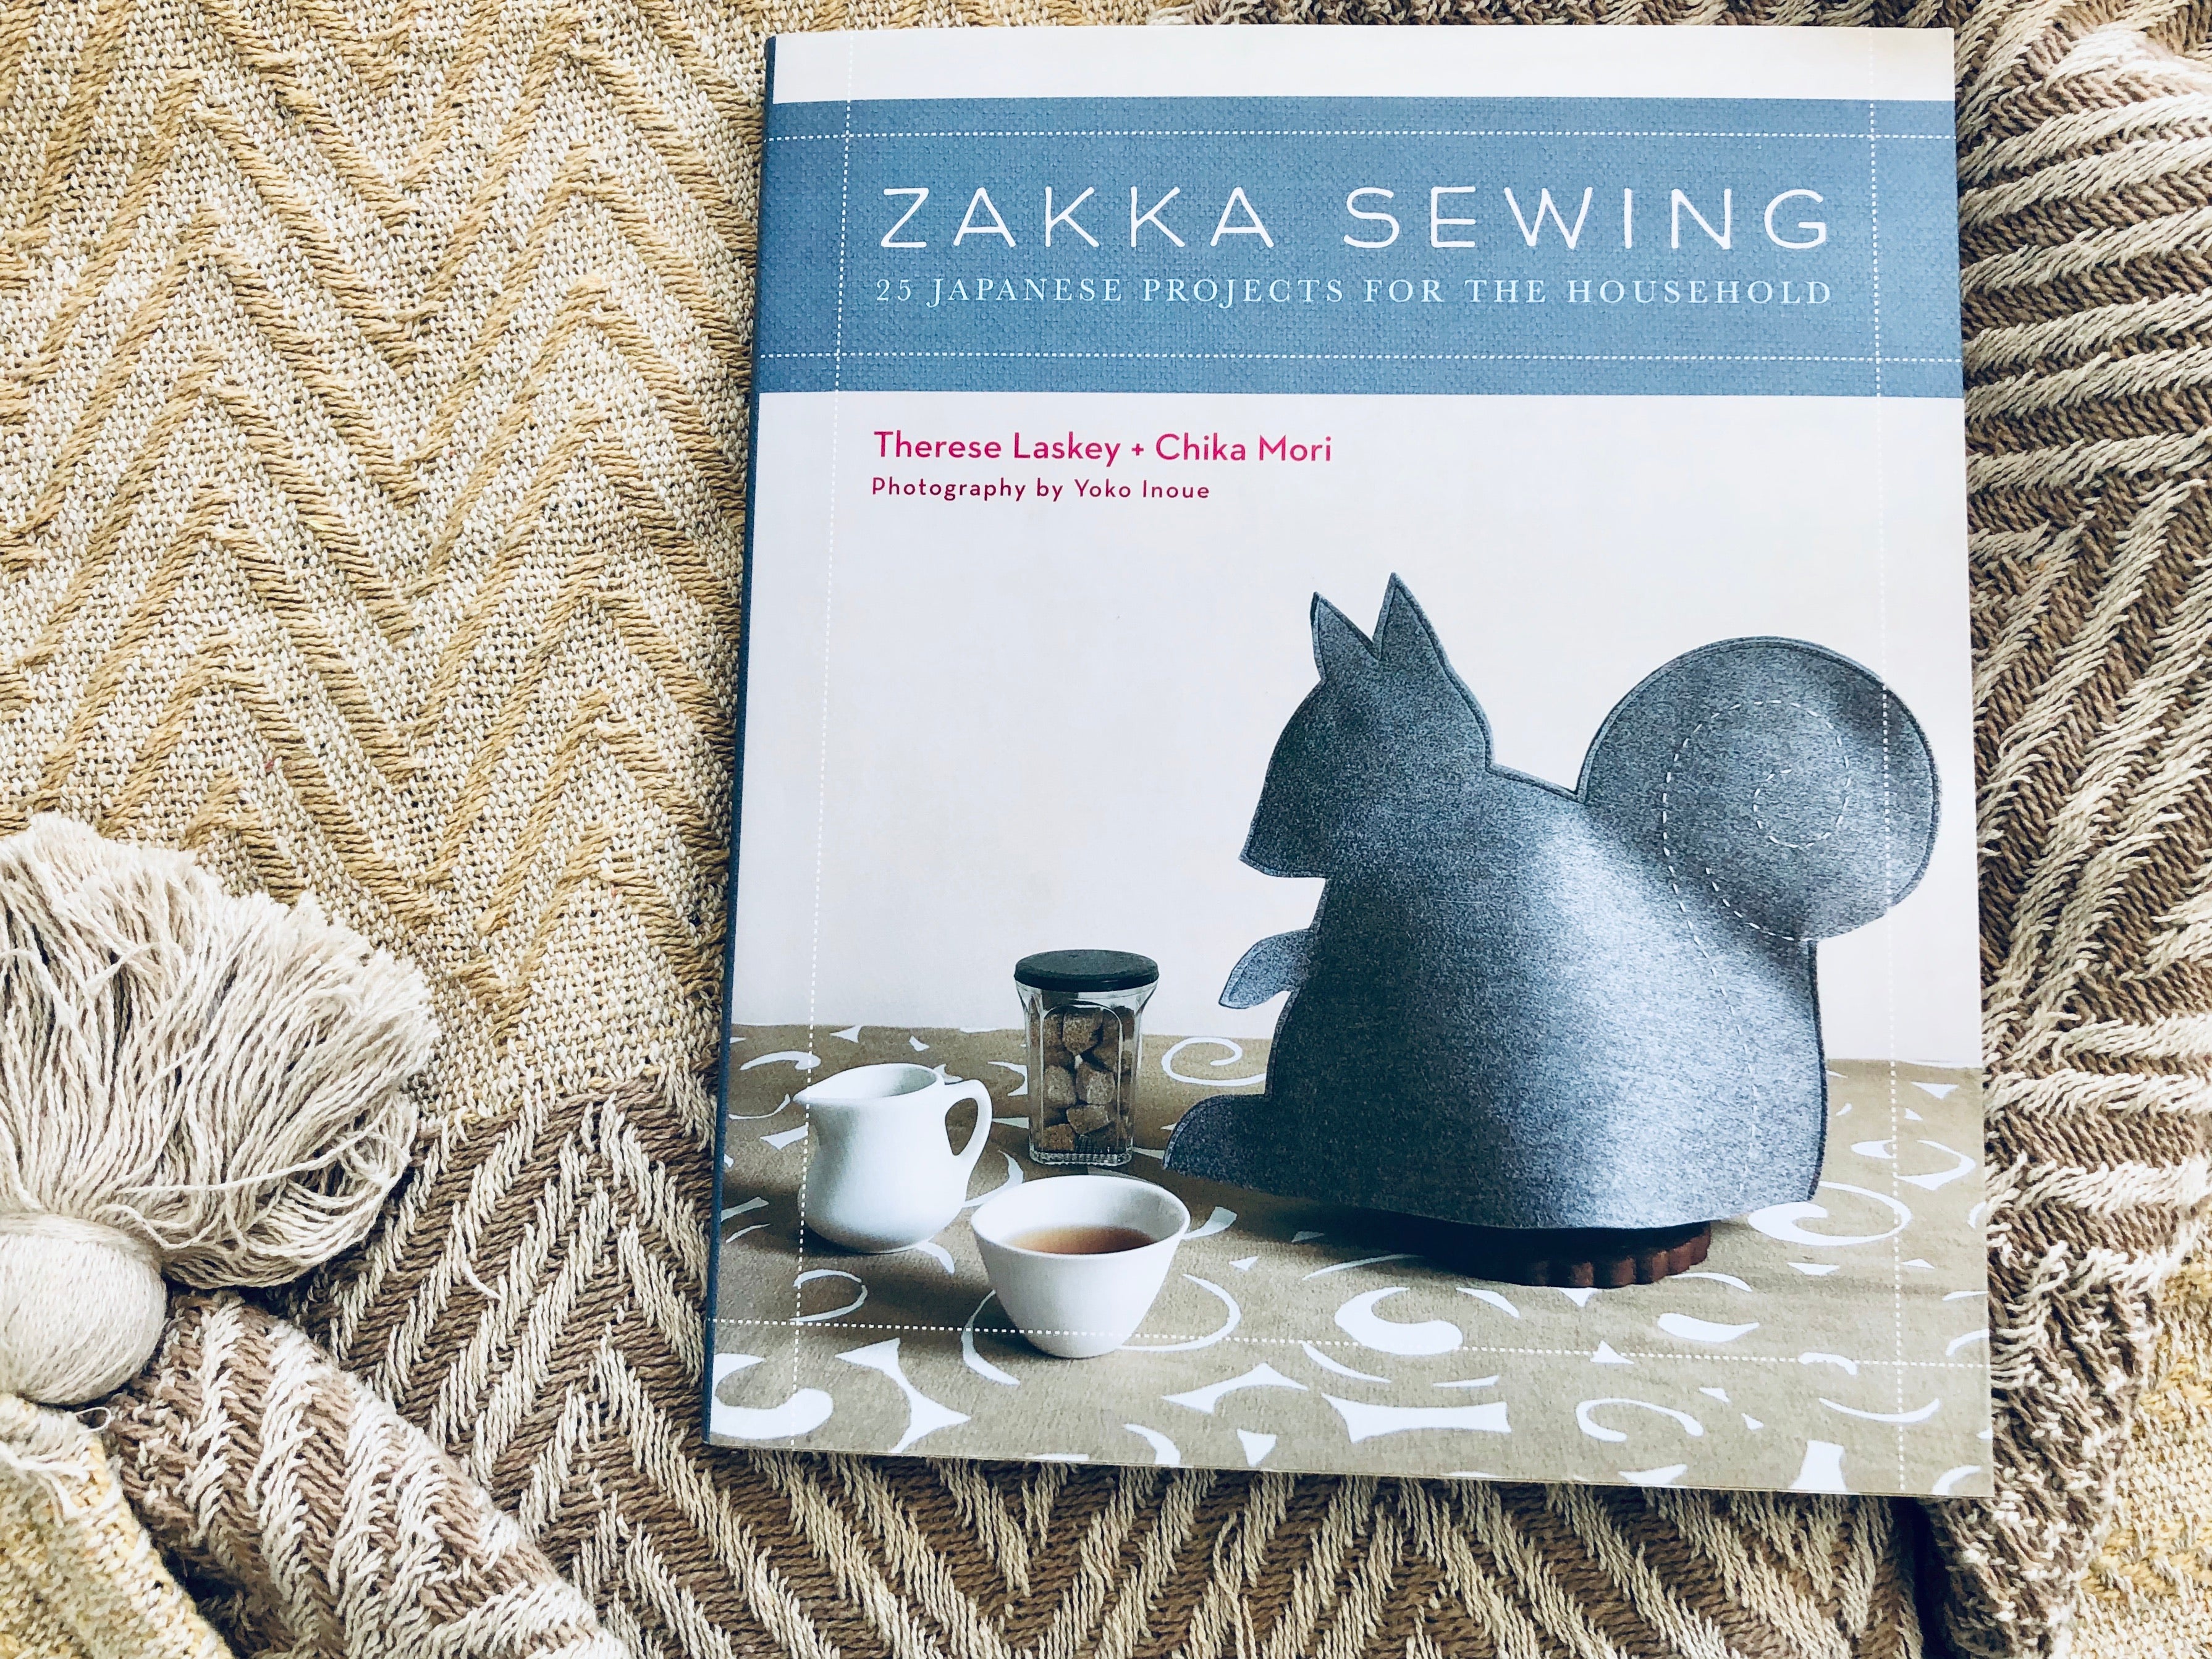 Zakka Sewing. 25 Japanese Projects For The Household